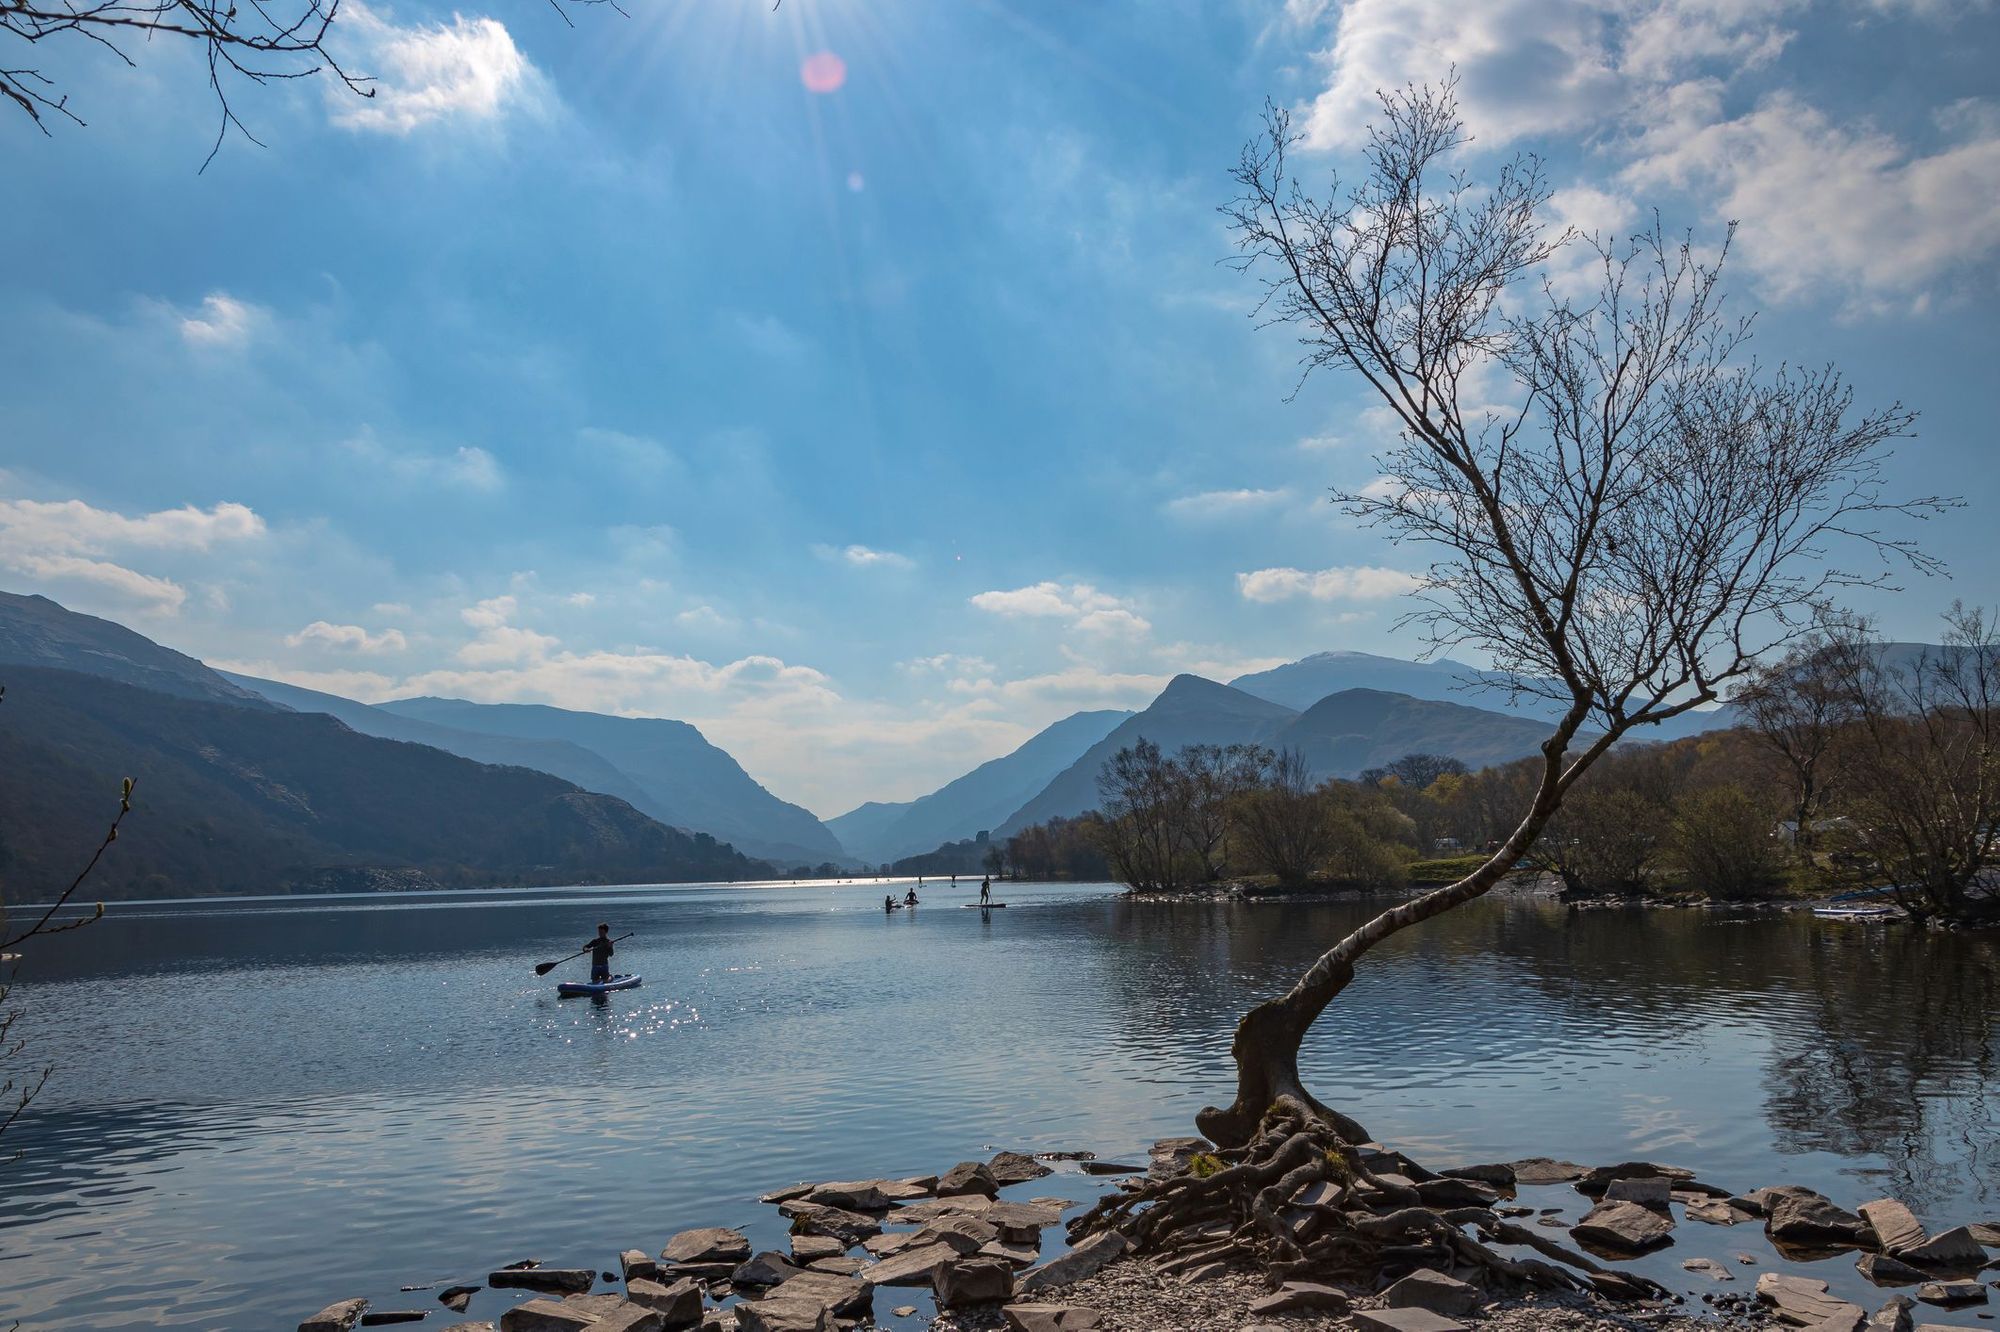 A group head out to paddle on the glimmering water of Lyln Padarn on a sunny day.